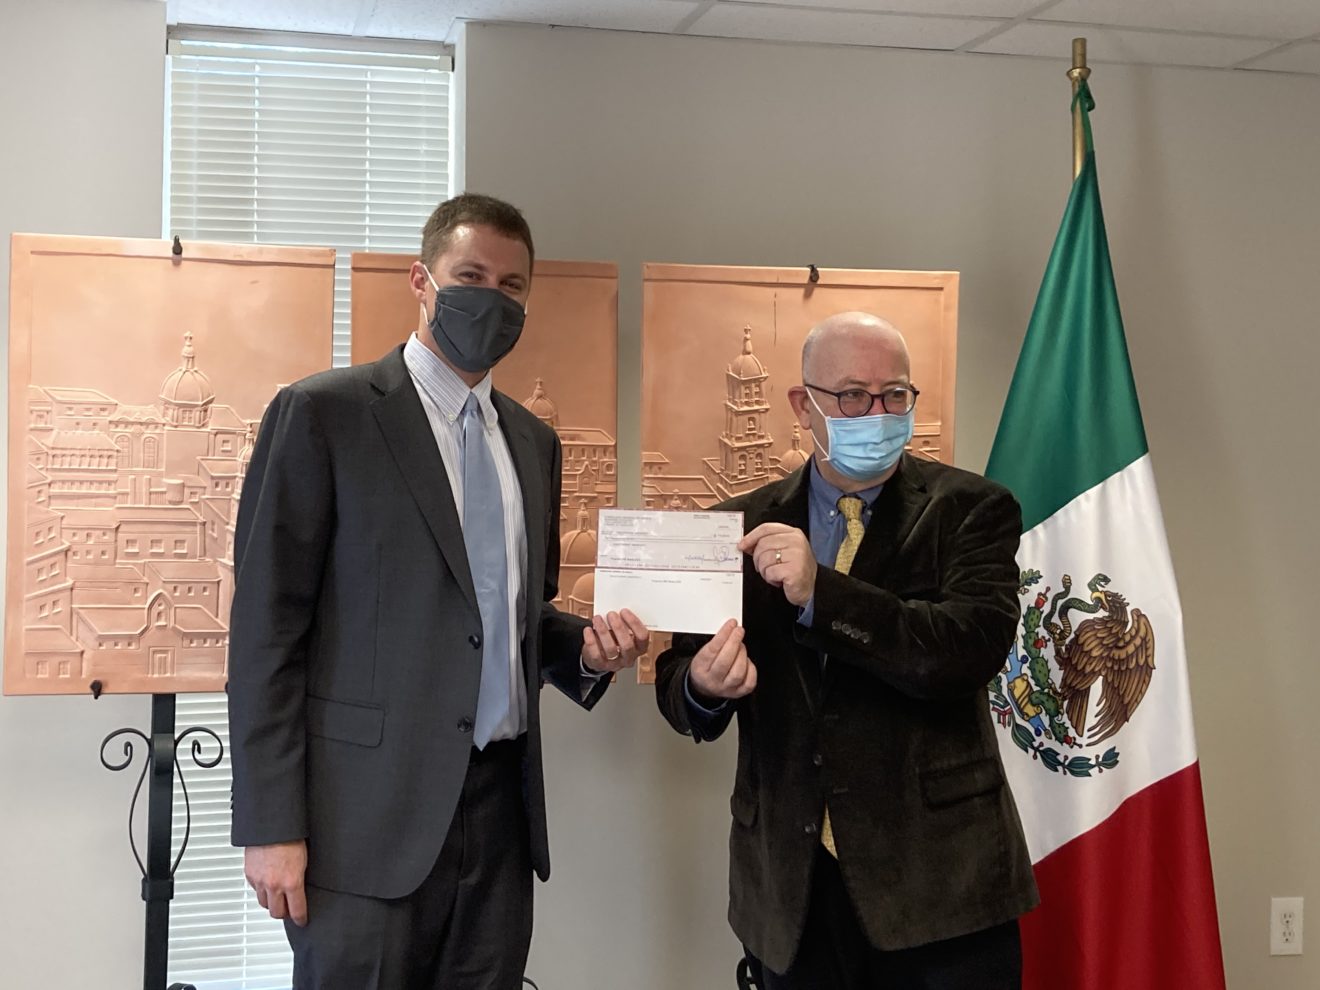 Consulate General of Mexico presents scholarship funds to benefit OU students